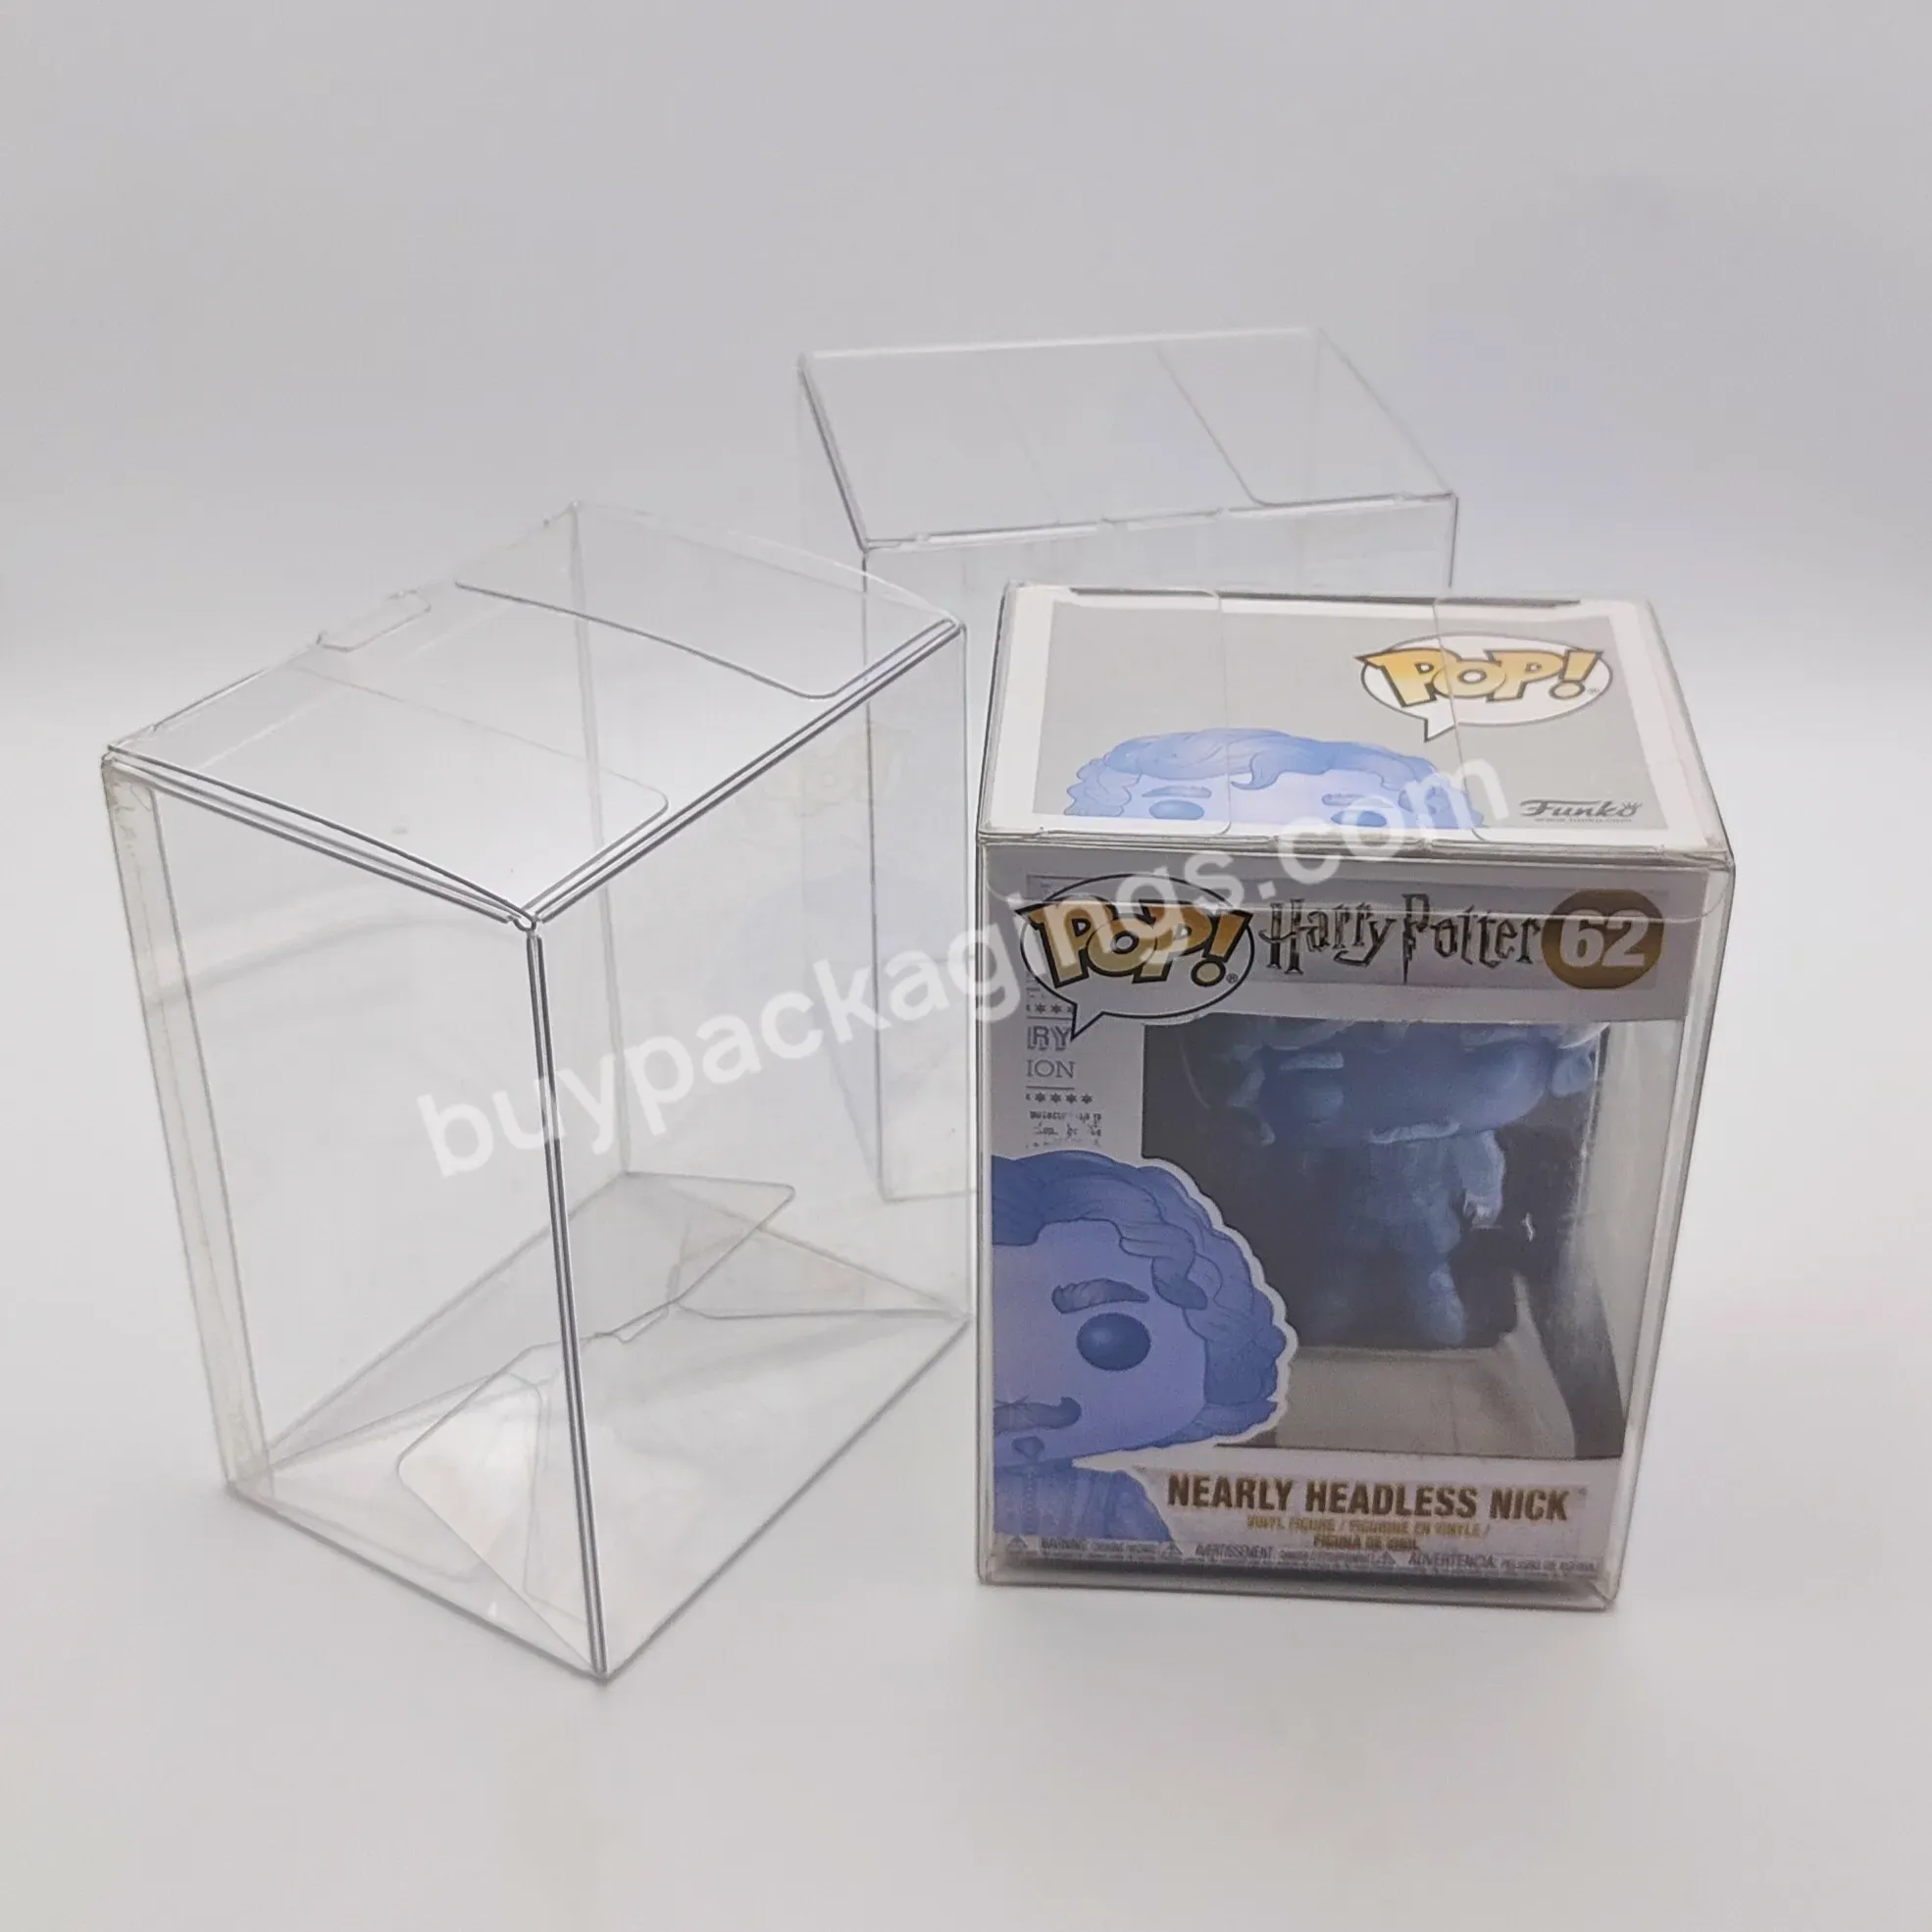 Wholesale Transparent Funko Pop 4 Inch 6 Inch 10 Inch 0.5mm Protector Pet Pvc Pop Box - Buy Protector Funko Pop,Wholesale Funko Pop Protectors,6 Inch Funko Pop Protector.